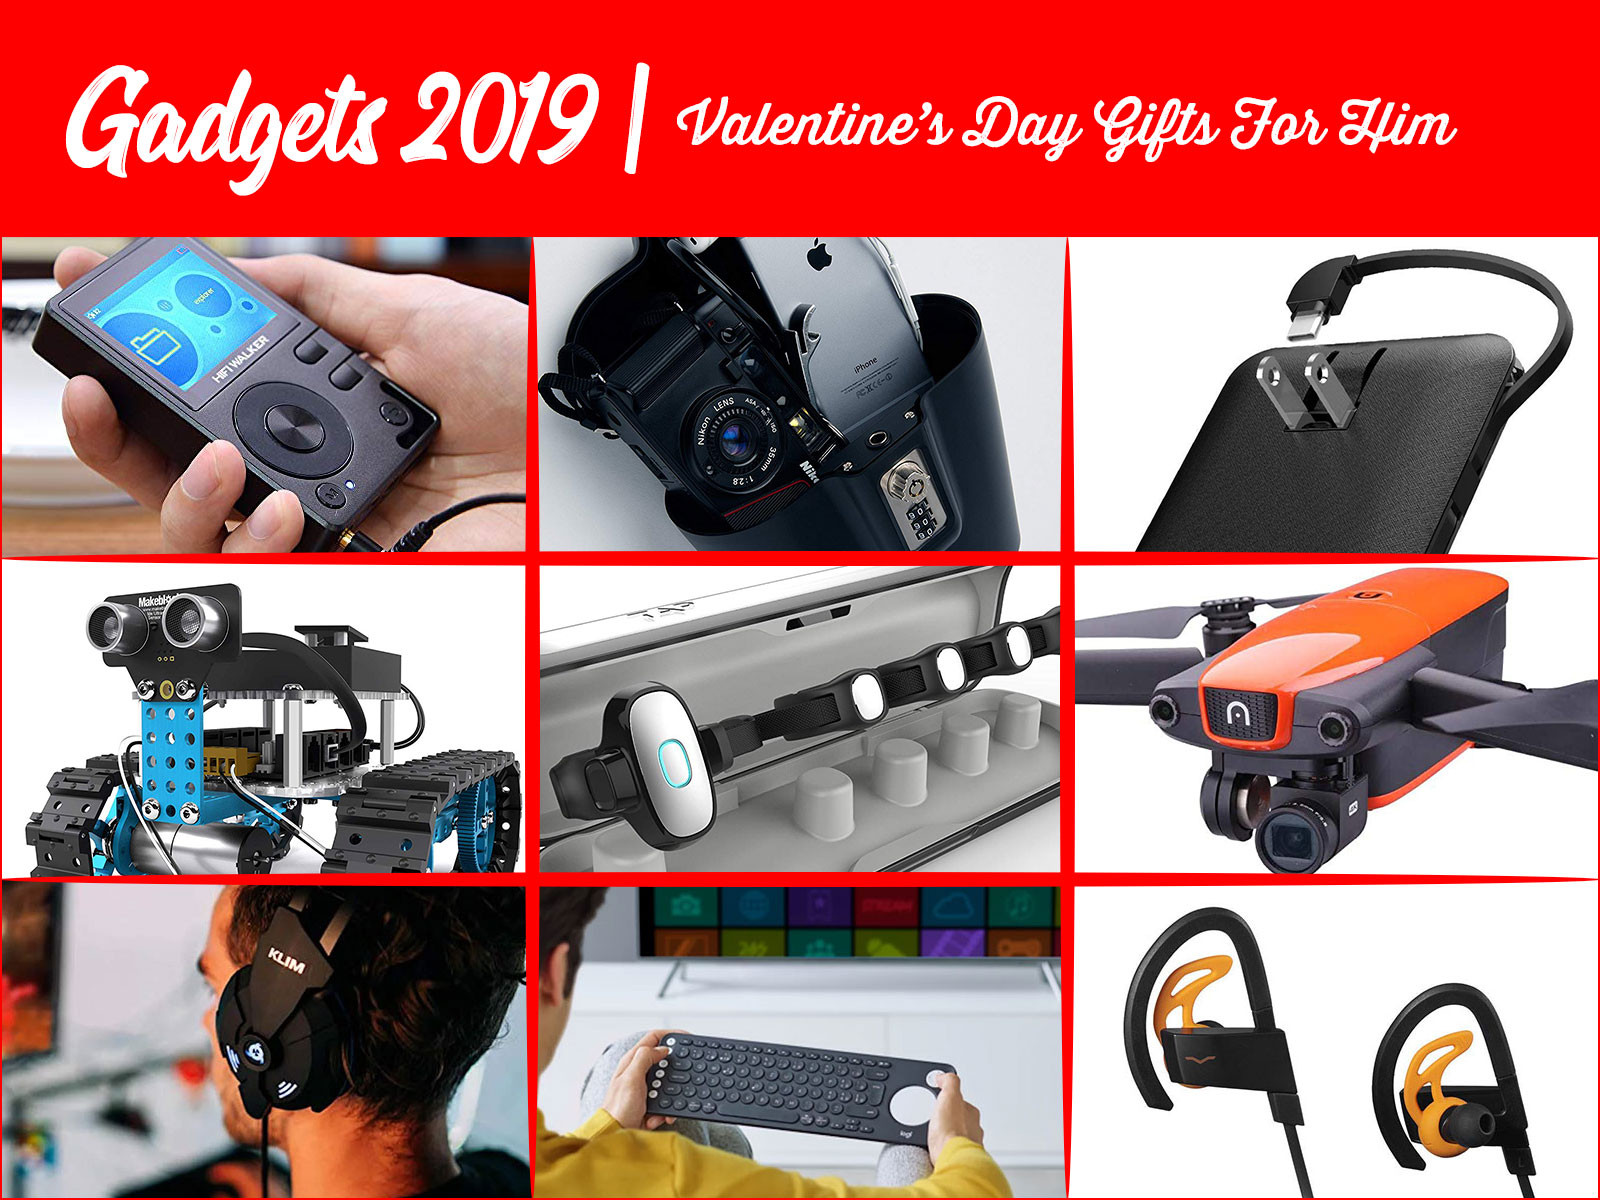 Valentines Day Gifts For Him 2019
 10 Cool Tech Gad s of 2019 as Valentine’s Day Gift For